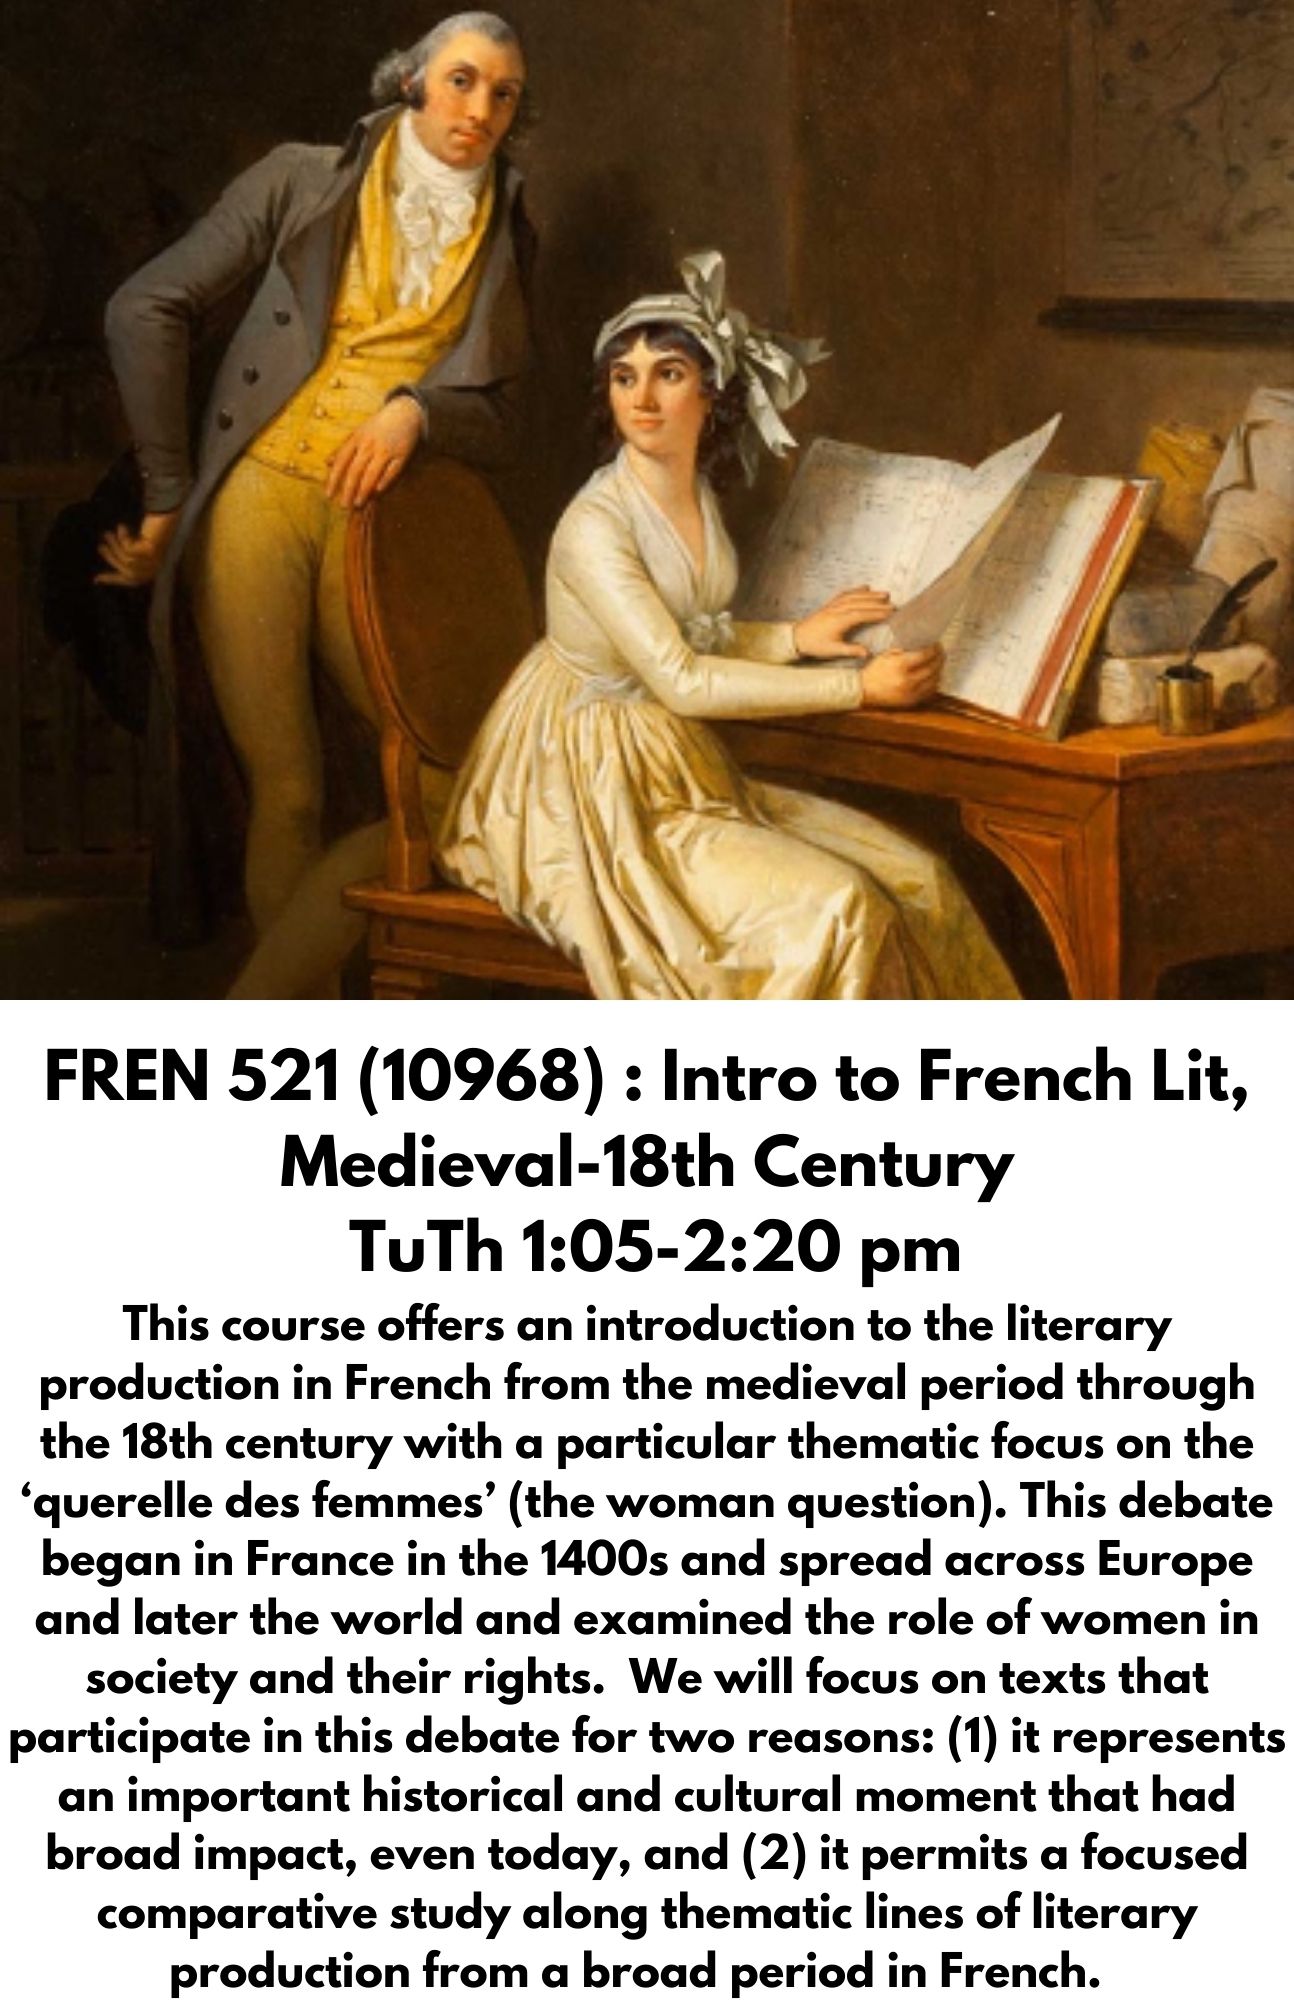 FREN 521 (10968) : Intro to French Lit, Medieval-18th Century  TuTh 1:05-2:20 pm This course offers an introduction to the literary production in French from the medieval period through the 18th century with a particular thematic focus on the ‘querelle des femmes’ (the woman question). This debate began in France in the 1400s and spread across Europe and later the world and examined the role of women in society and their rights.  We will focus on texts that participate in this debate for two reasons: (1) it represents an important historical and cultural moment that had broad impact, even today, and (2) it permits a focused comparative study along thematic lines of literary production from a broad period in French.